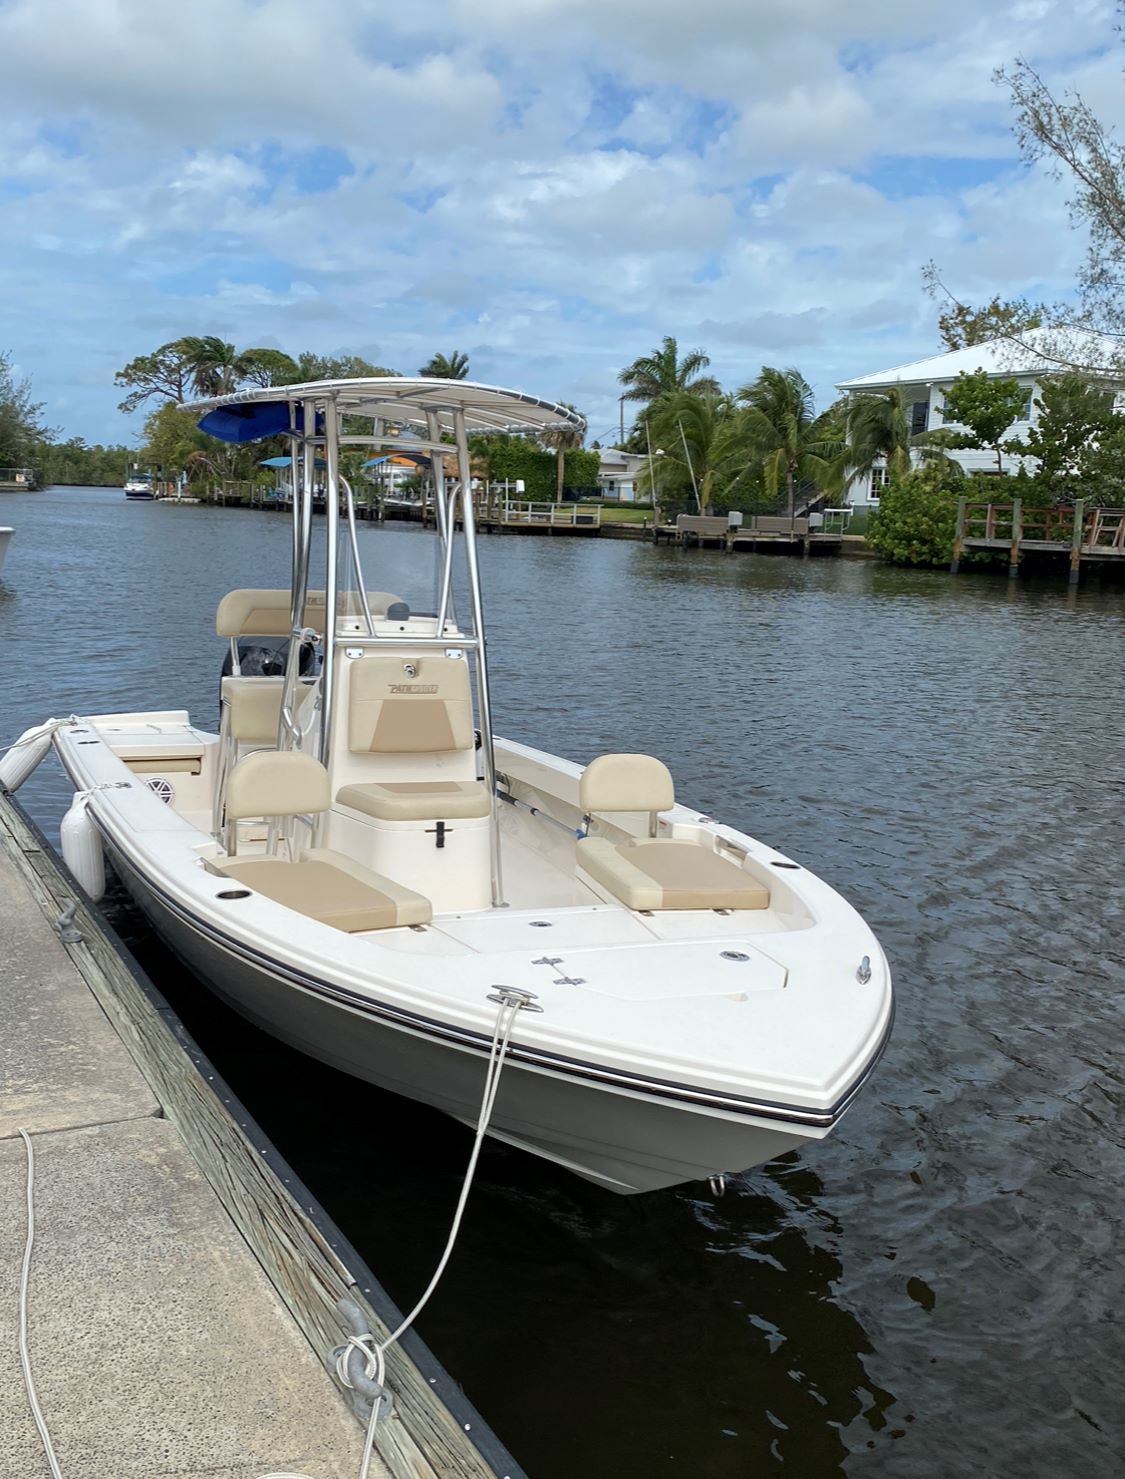 Cardinals Roost (21FT Center Console Pathfinder 150 HP Fishing)